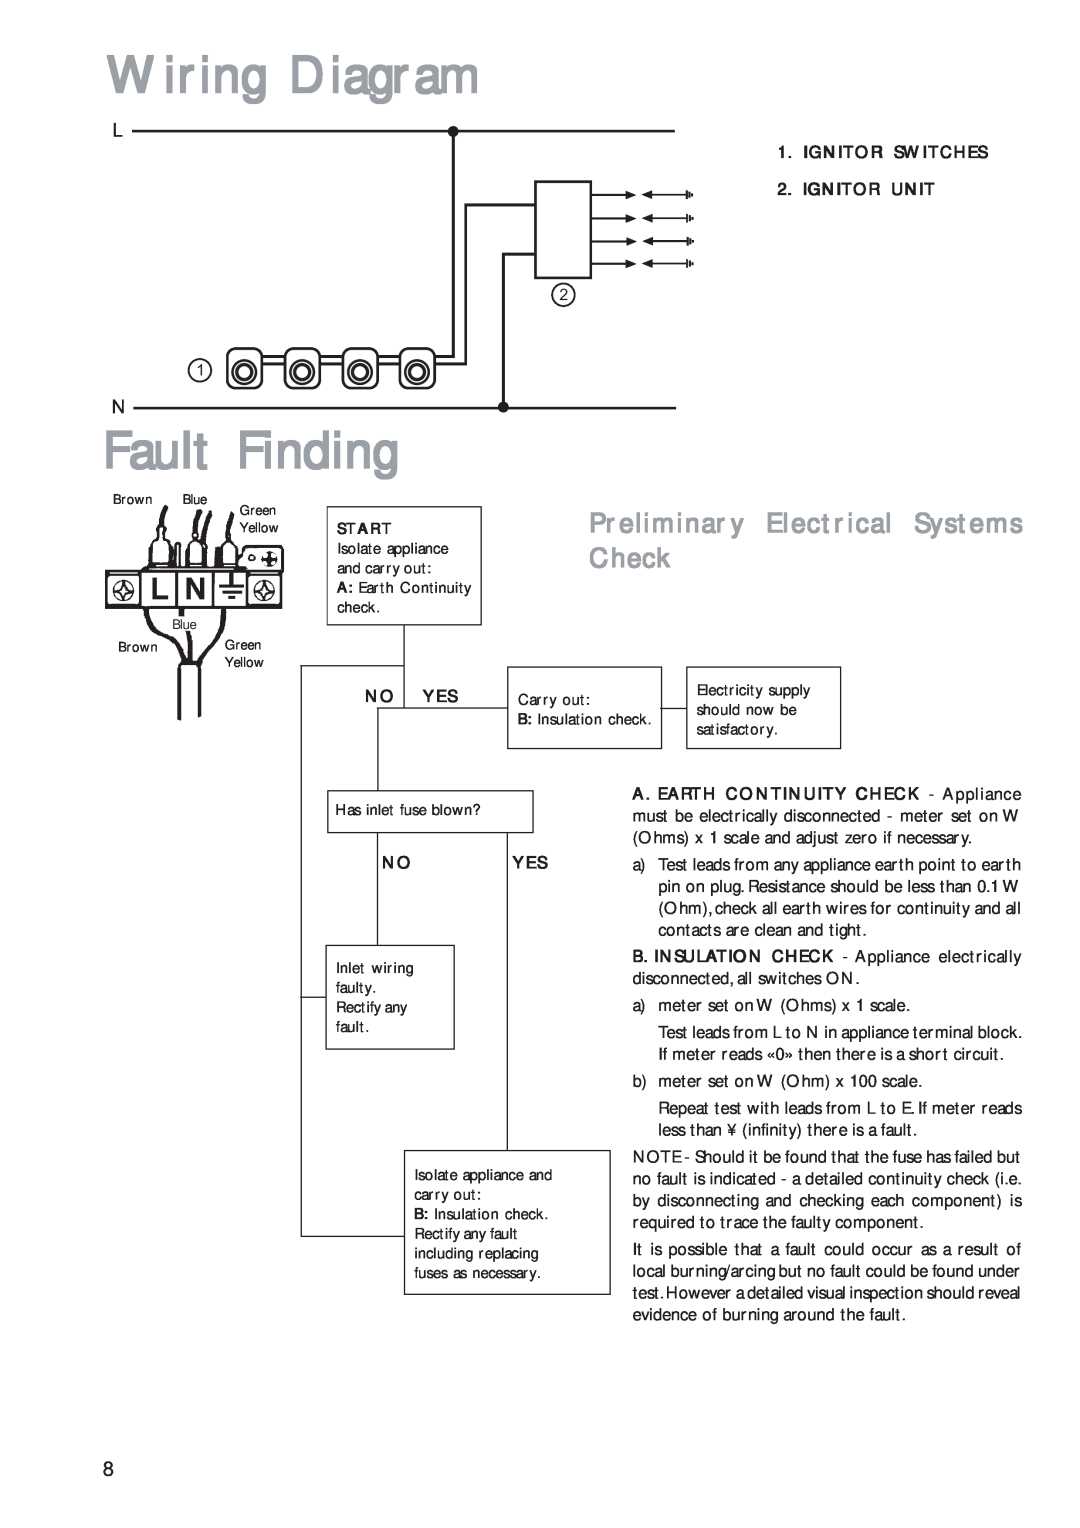 John Lewis JLBIGH601 Wiring Diagram, Fault Finding, Preliminary Electrical Systems, Check, Ignitor Switches, Ignitor Unit 